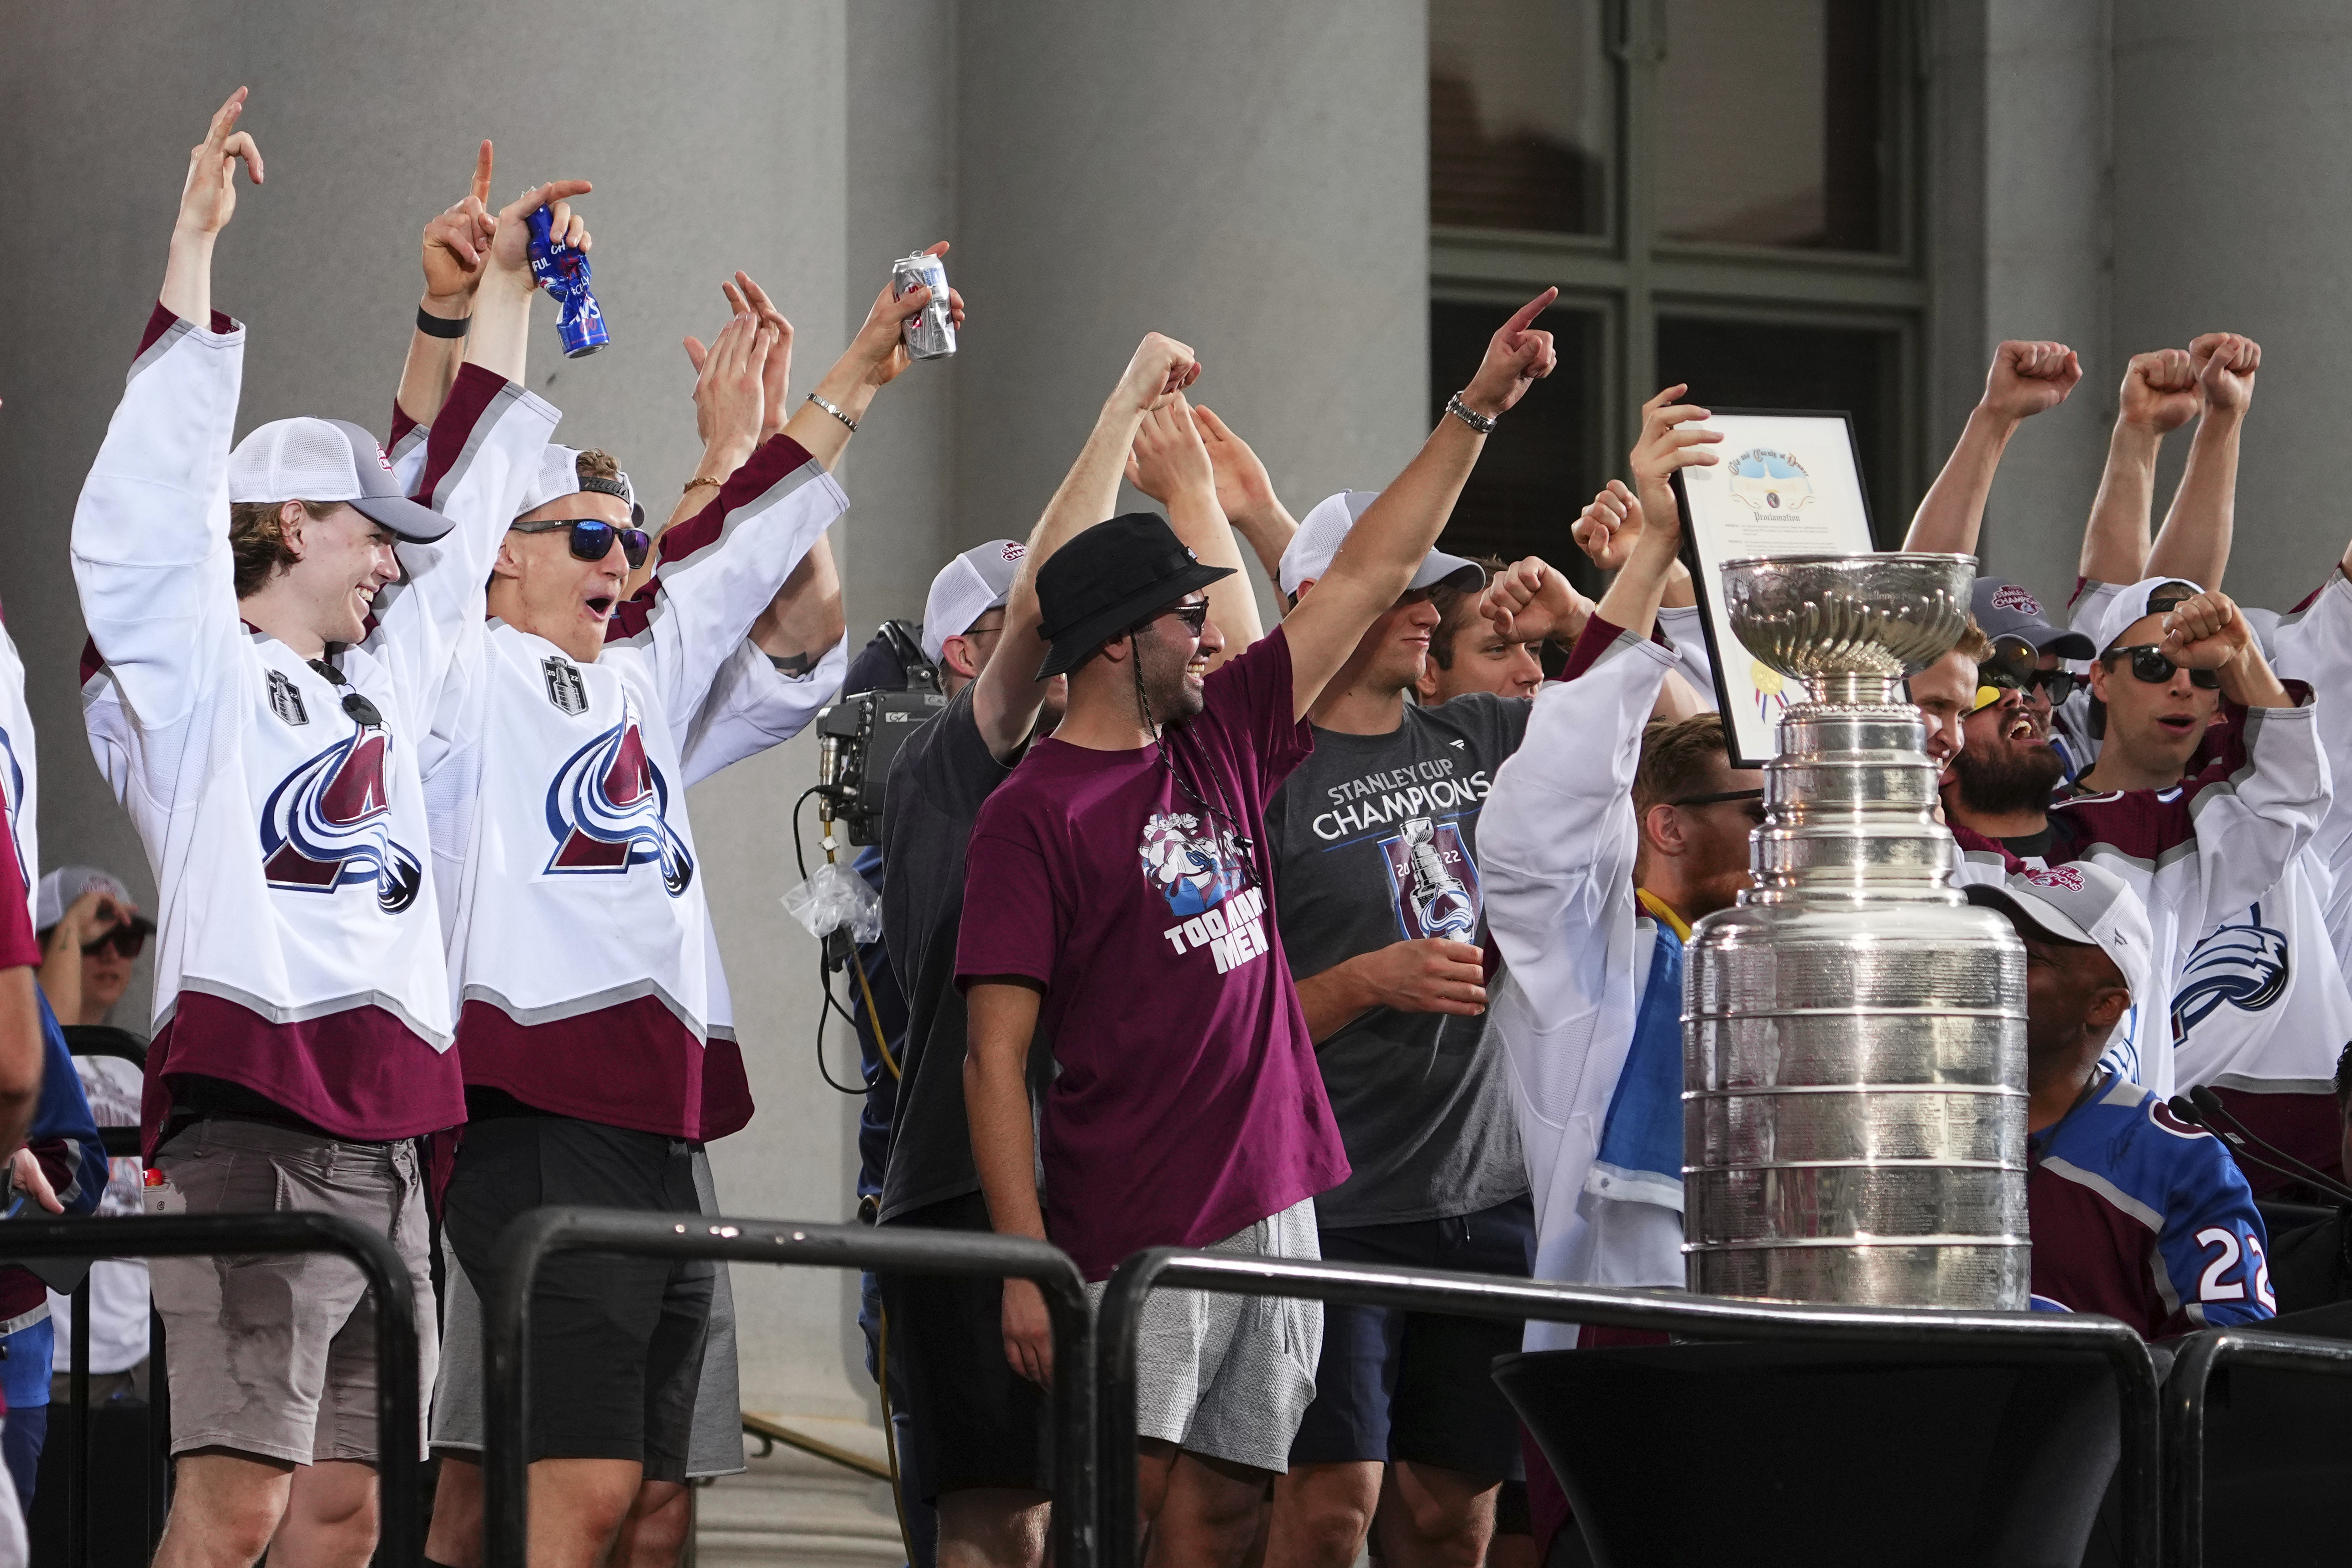 Parade of champs: Avs live it up as they celebrate Cup title